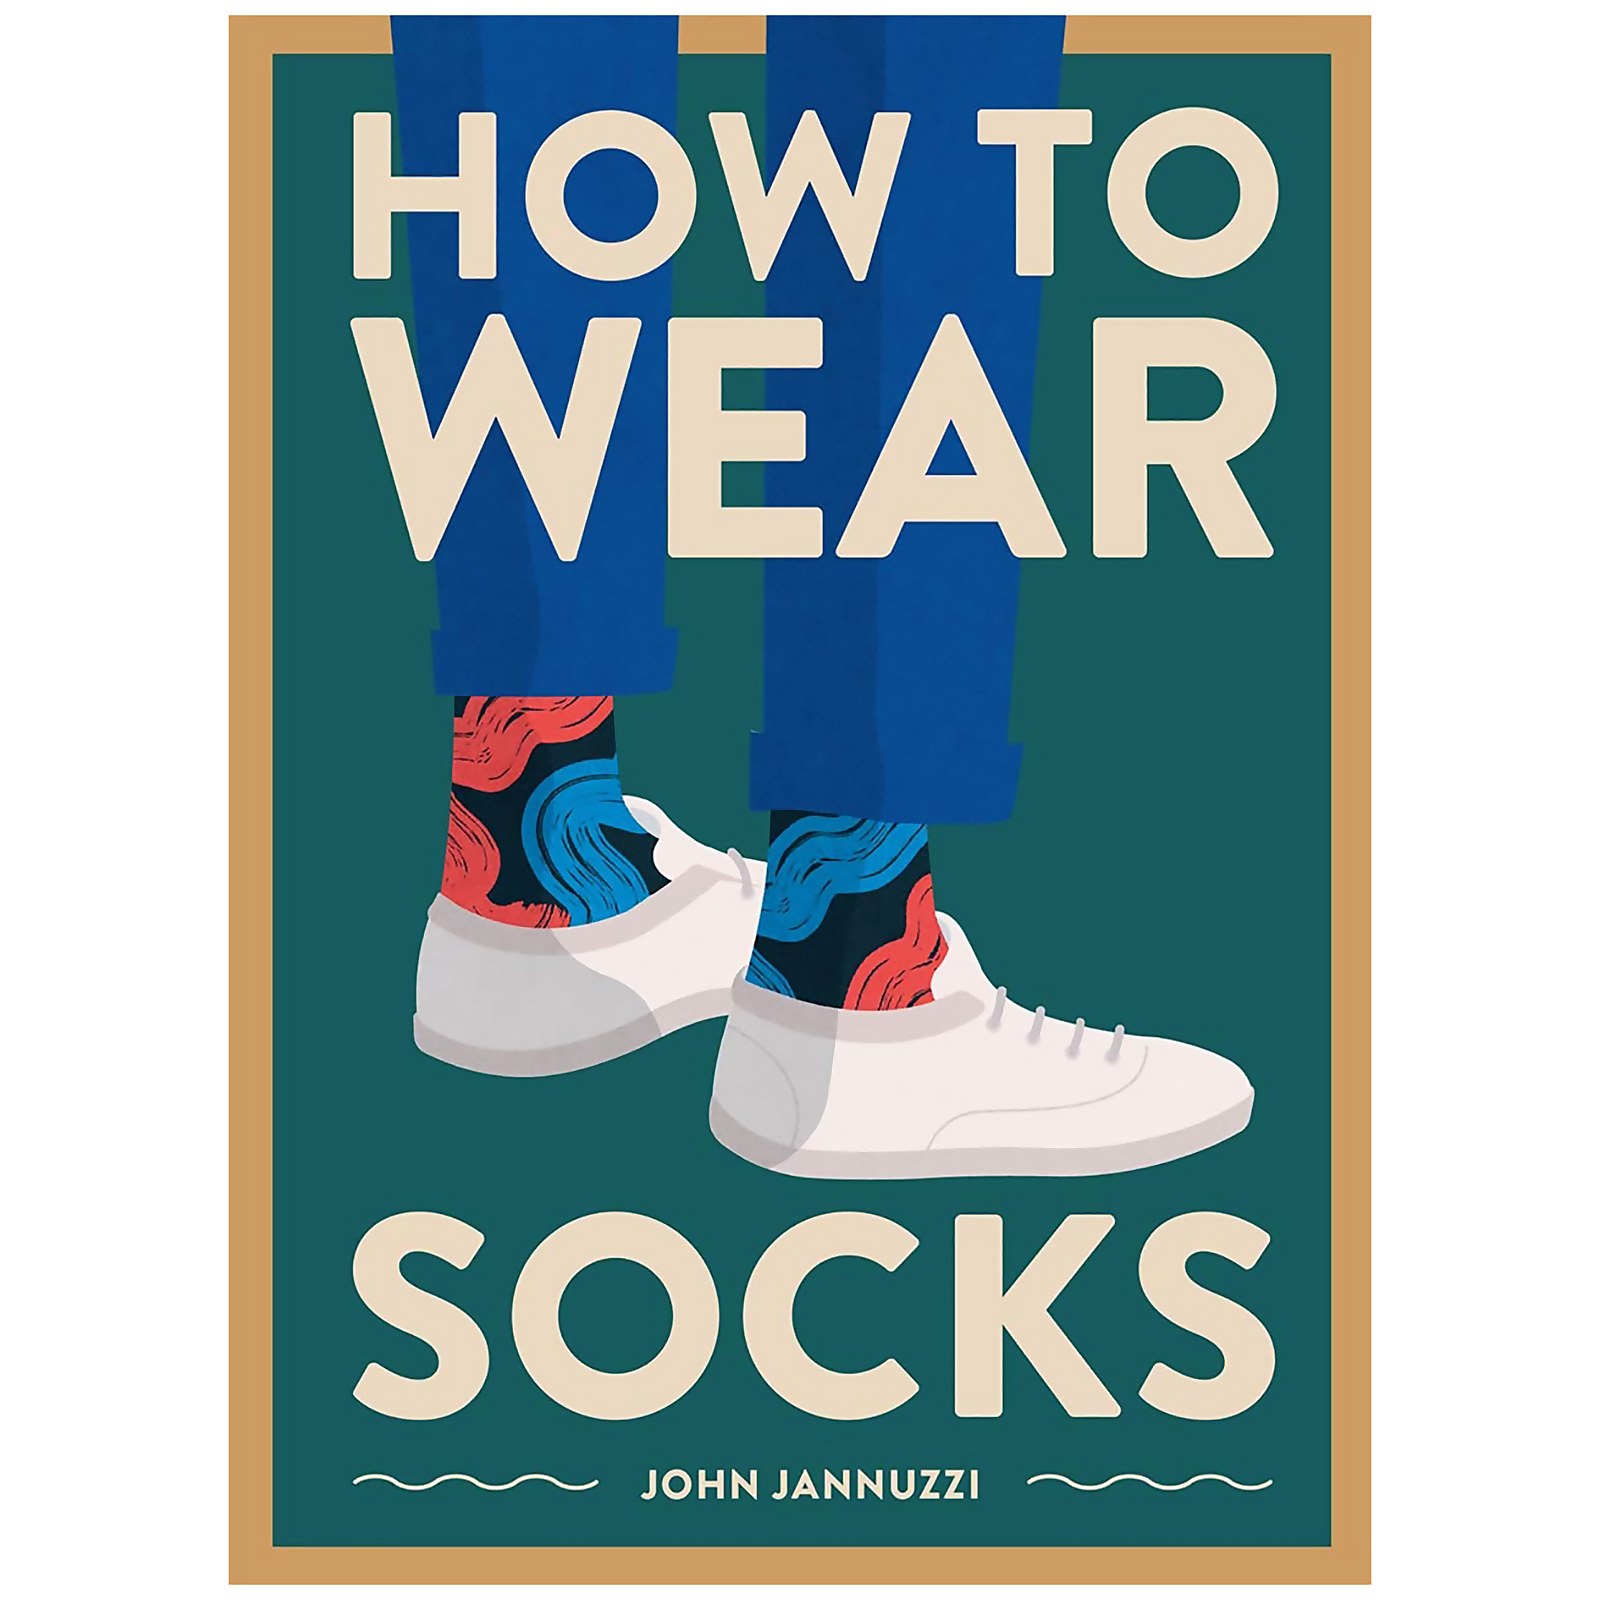 Abrams & Chronicle: How To Wear Socks